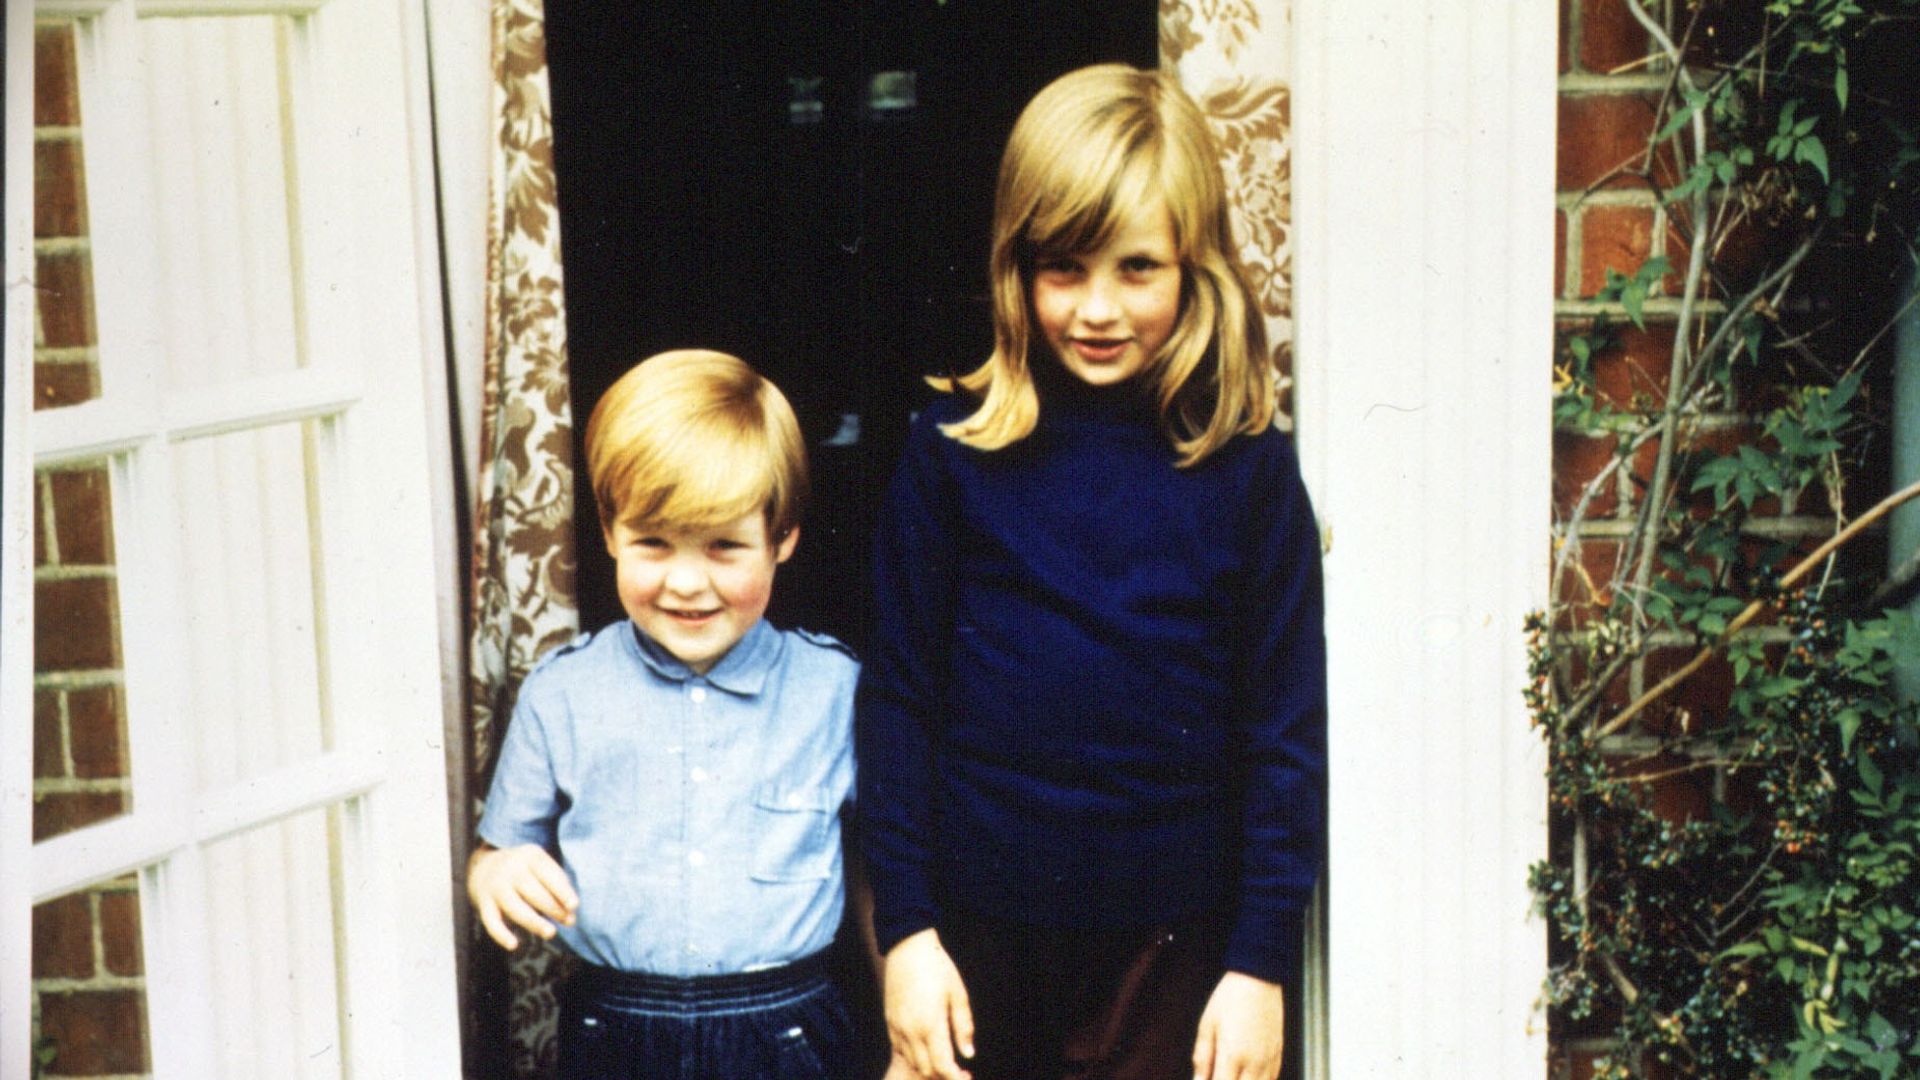 princess diana and charles spencer as children at althrop house